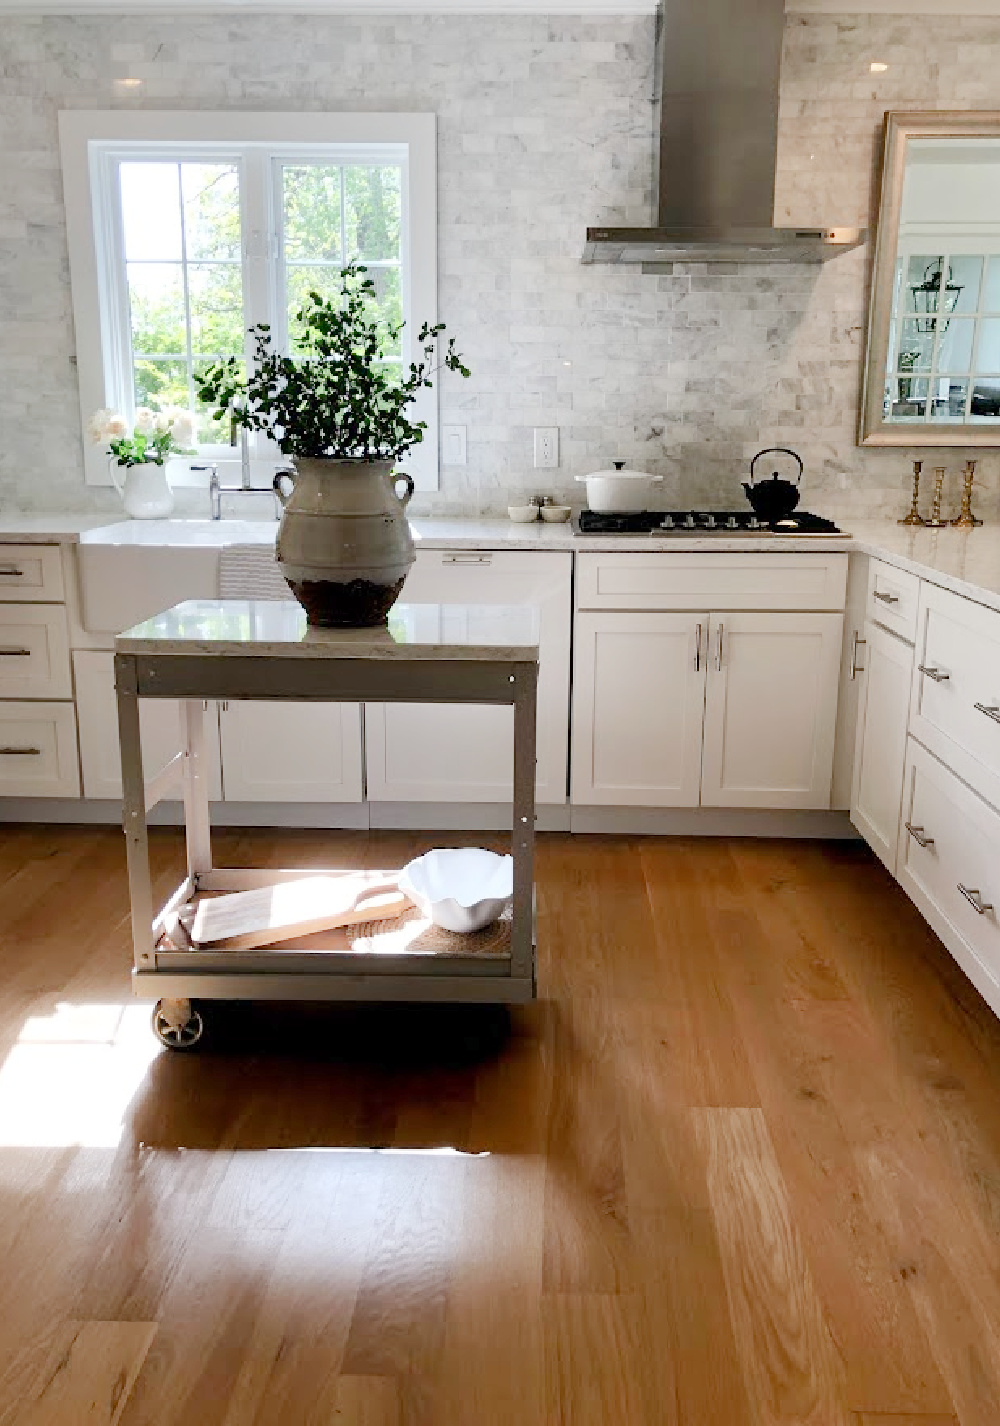 Hello Lovely's white European country modern French kitchen with Minuet Viatera quartz counters, farm sink, industrial cart, and marble subway backsplash.